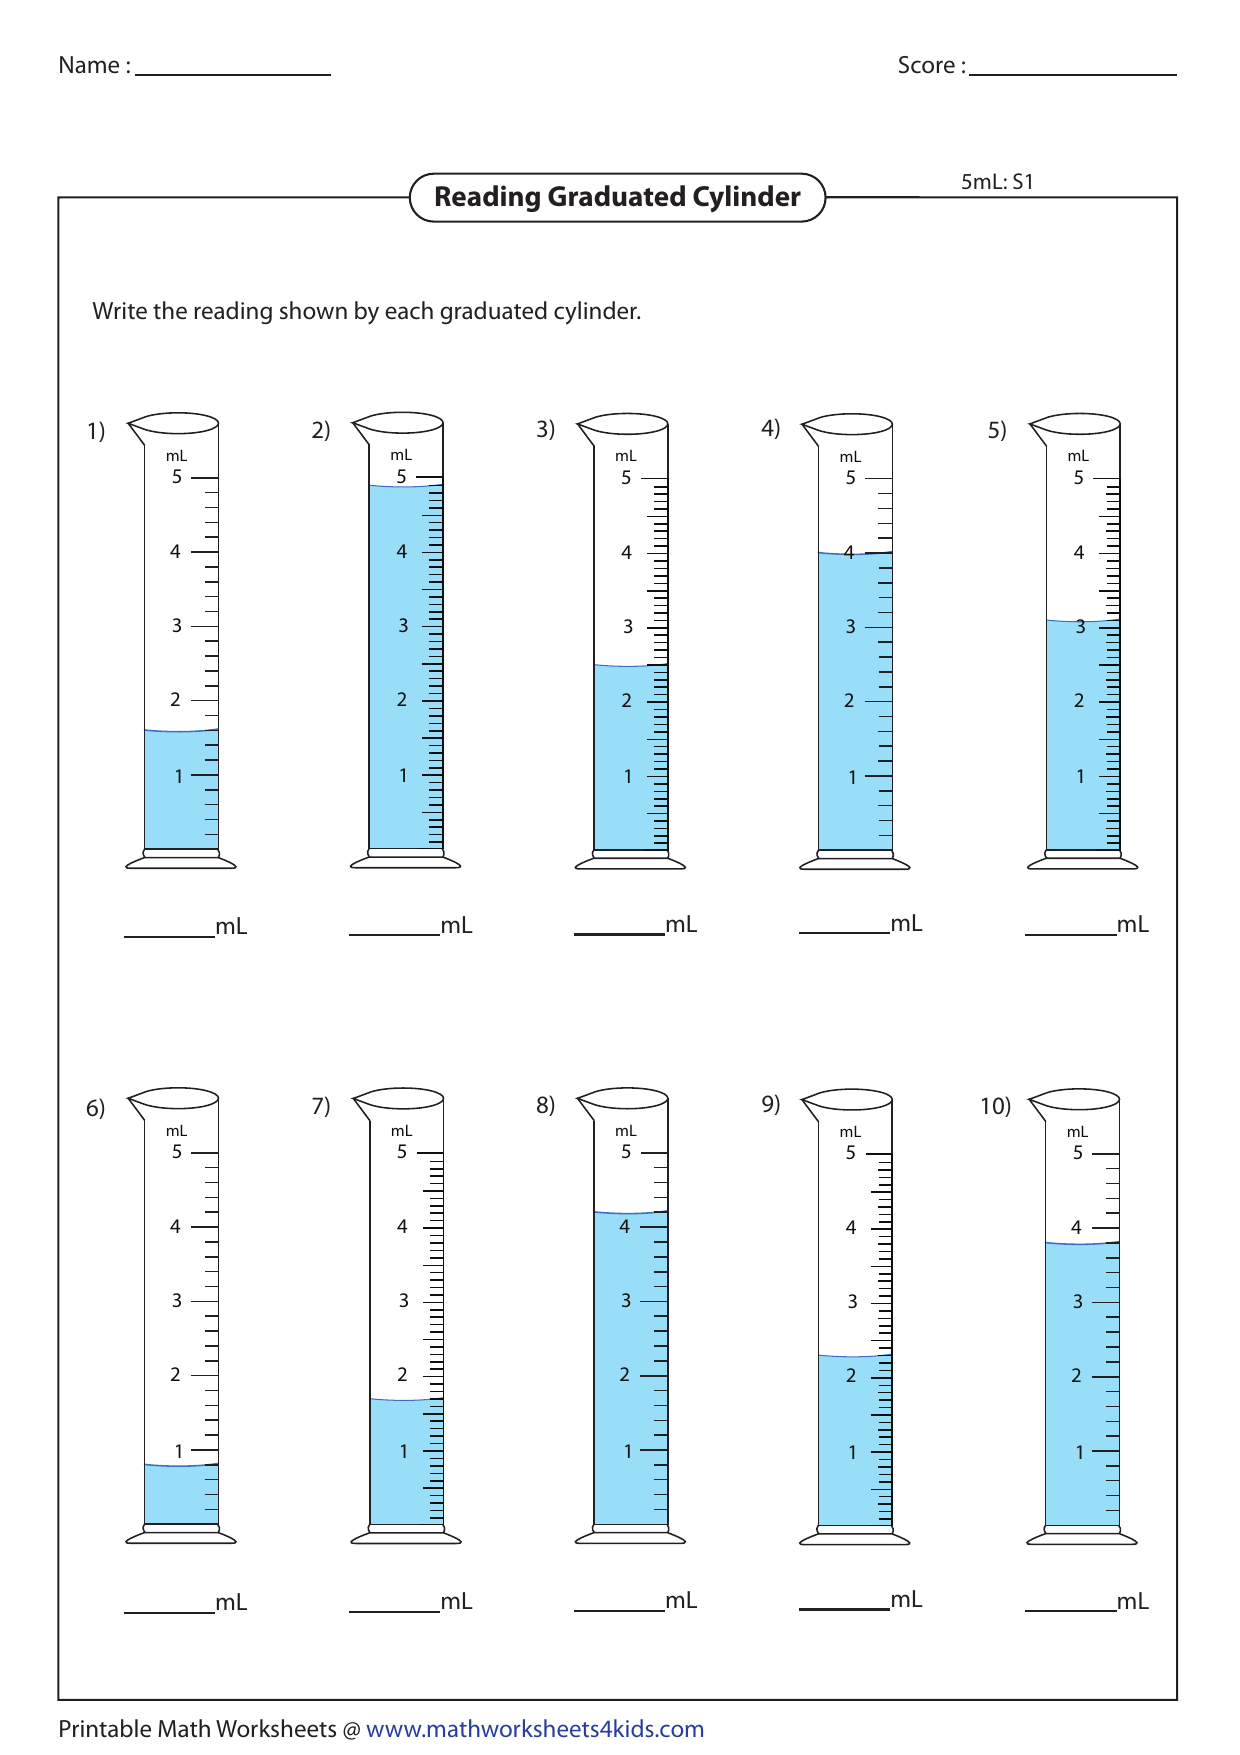 22 ml graduated cylinder ws only With Reading Graduated Cylinders Worksheet